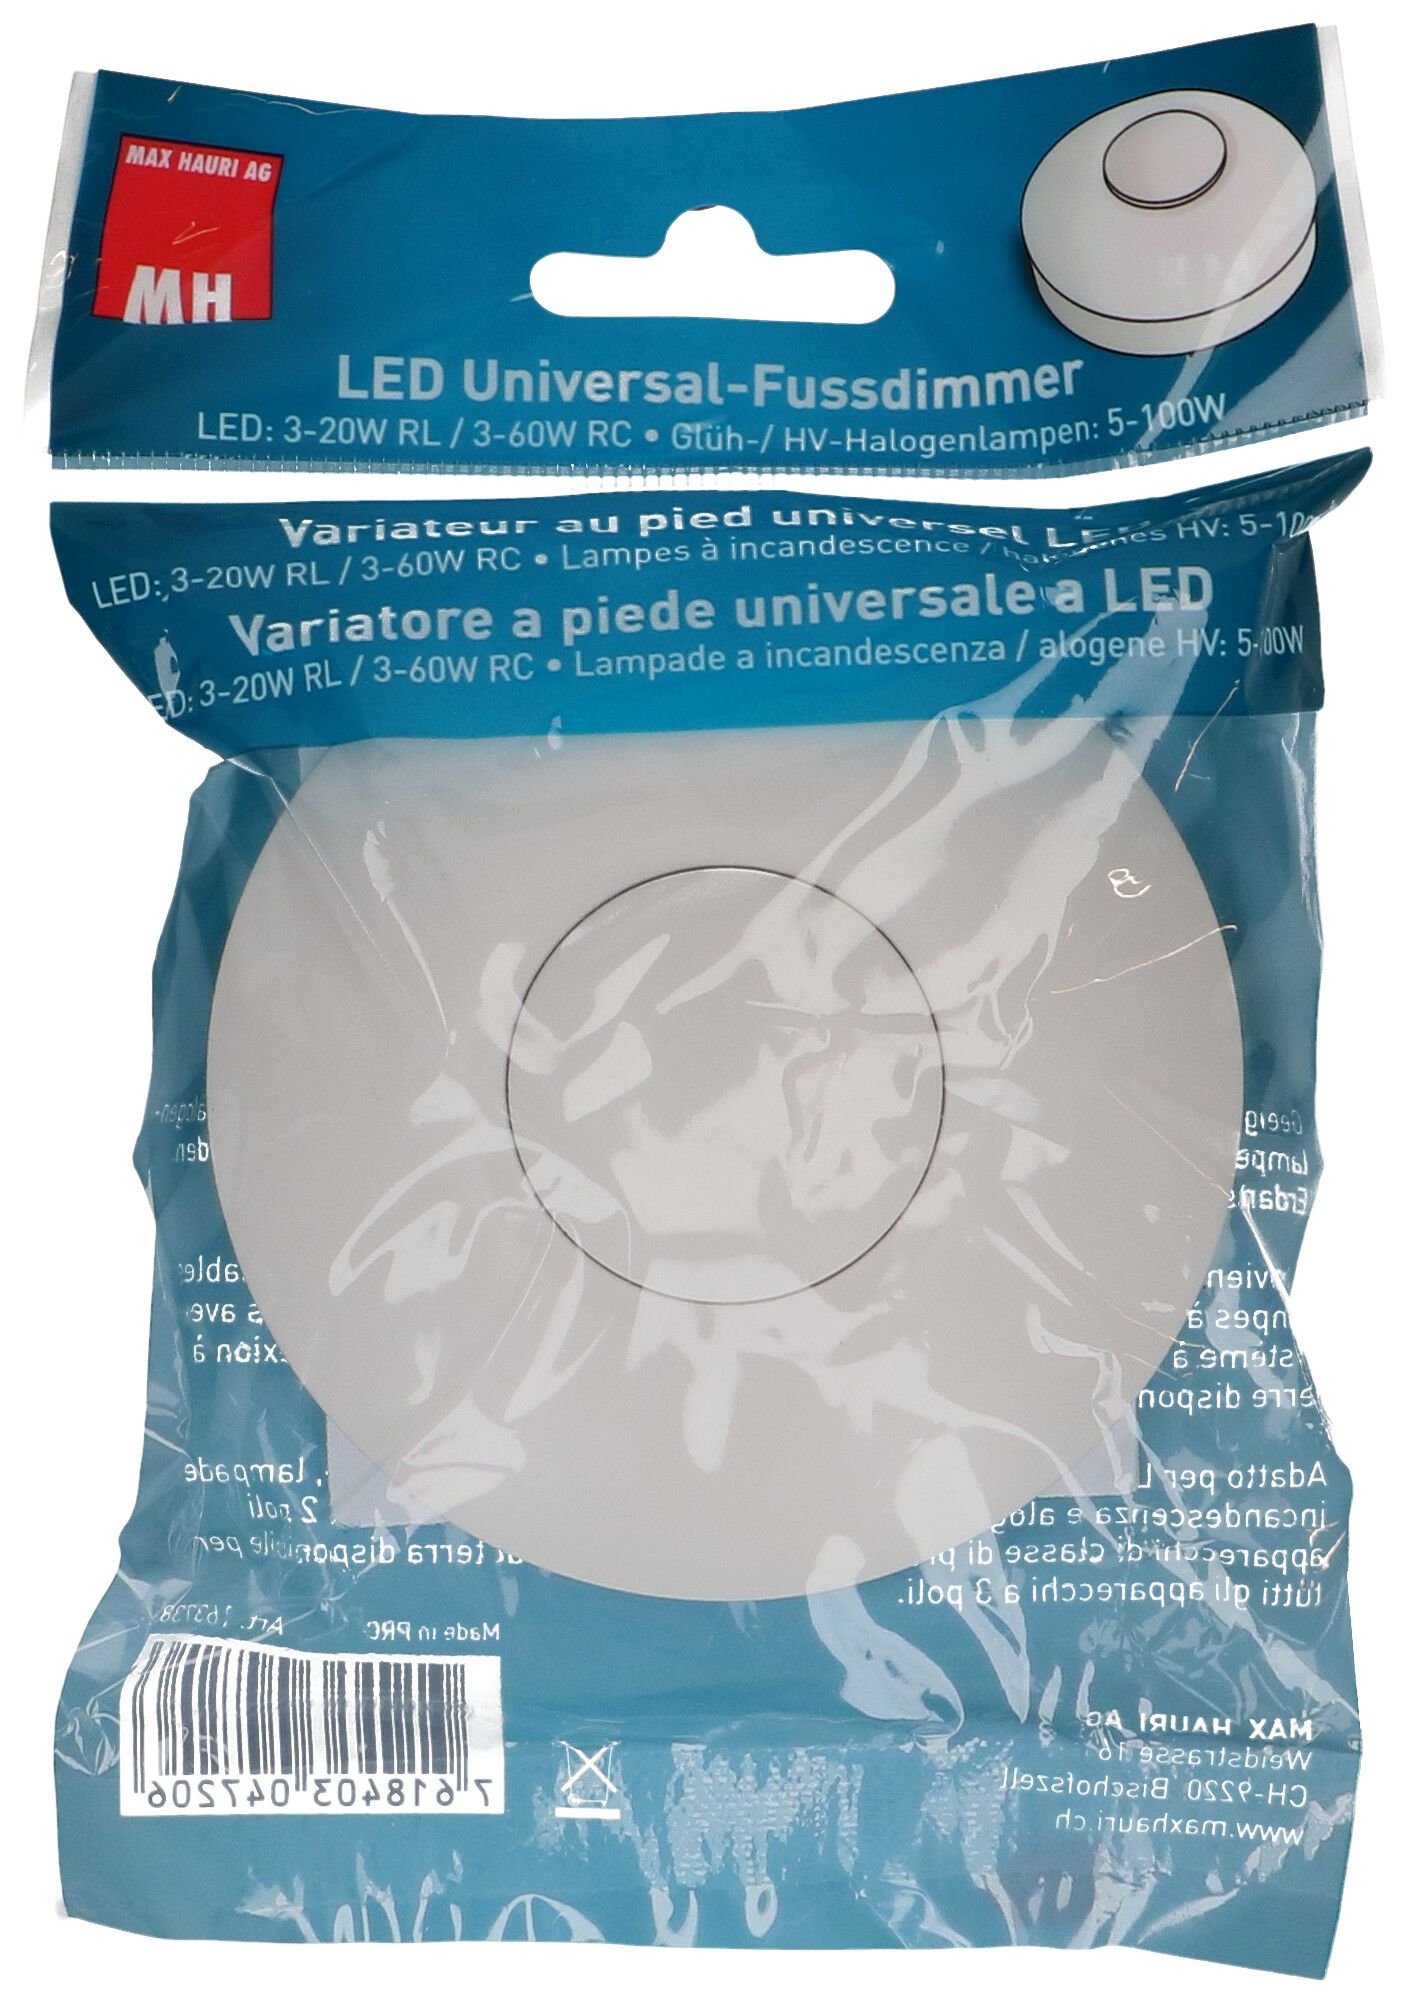 LED-Universal-Fussdimmer weiss